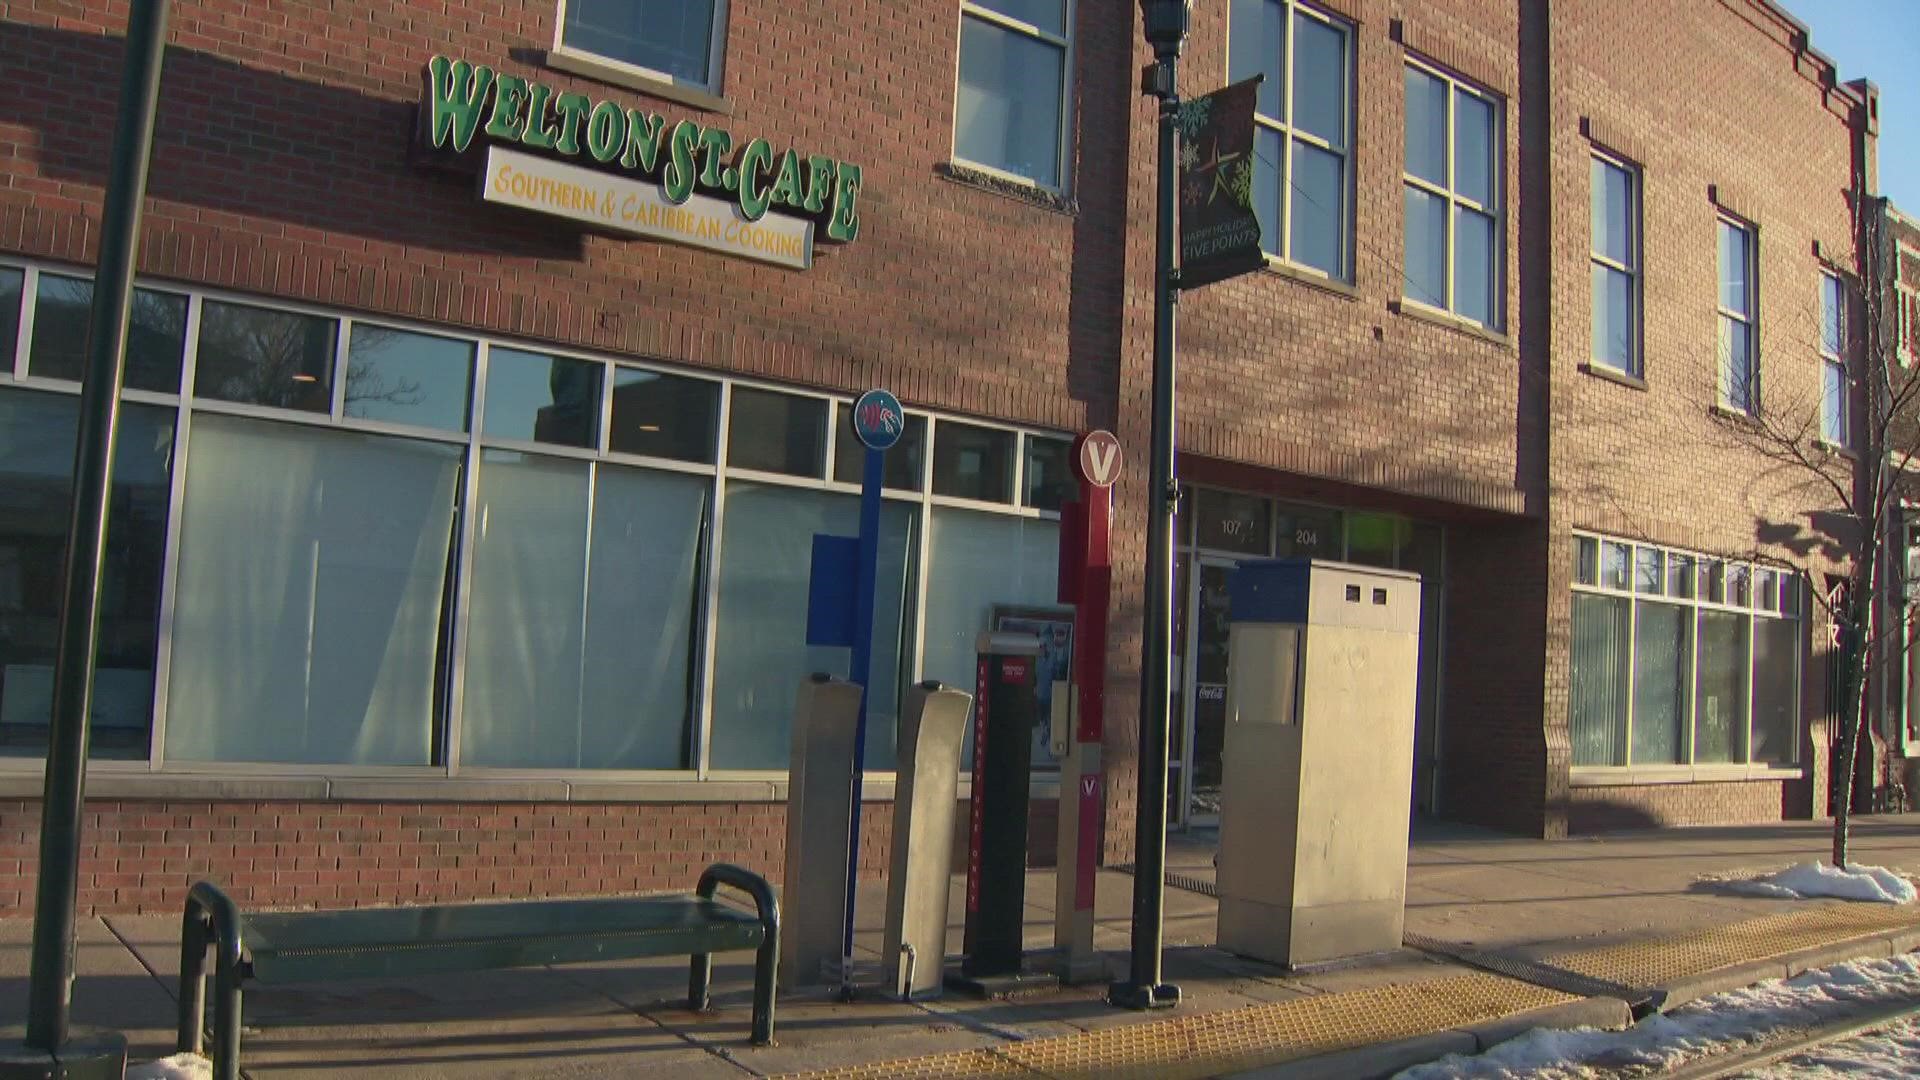 The Welton Street Cafe has been a part of Denver's Five Points community for almost 40 years.